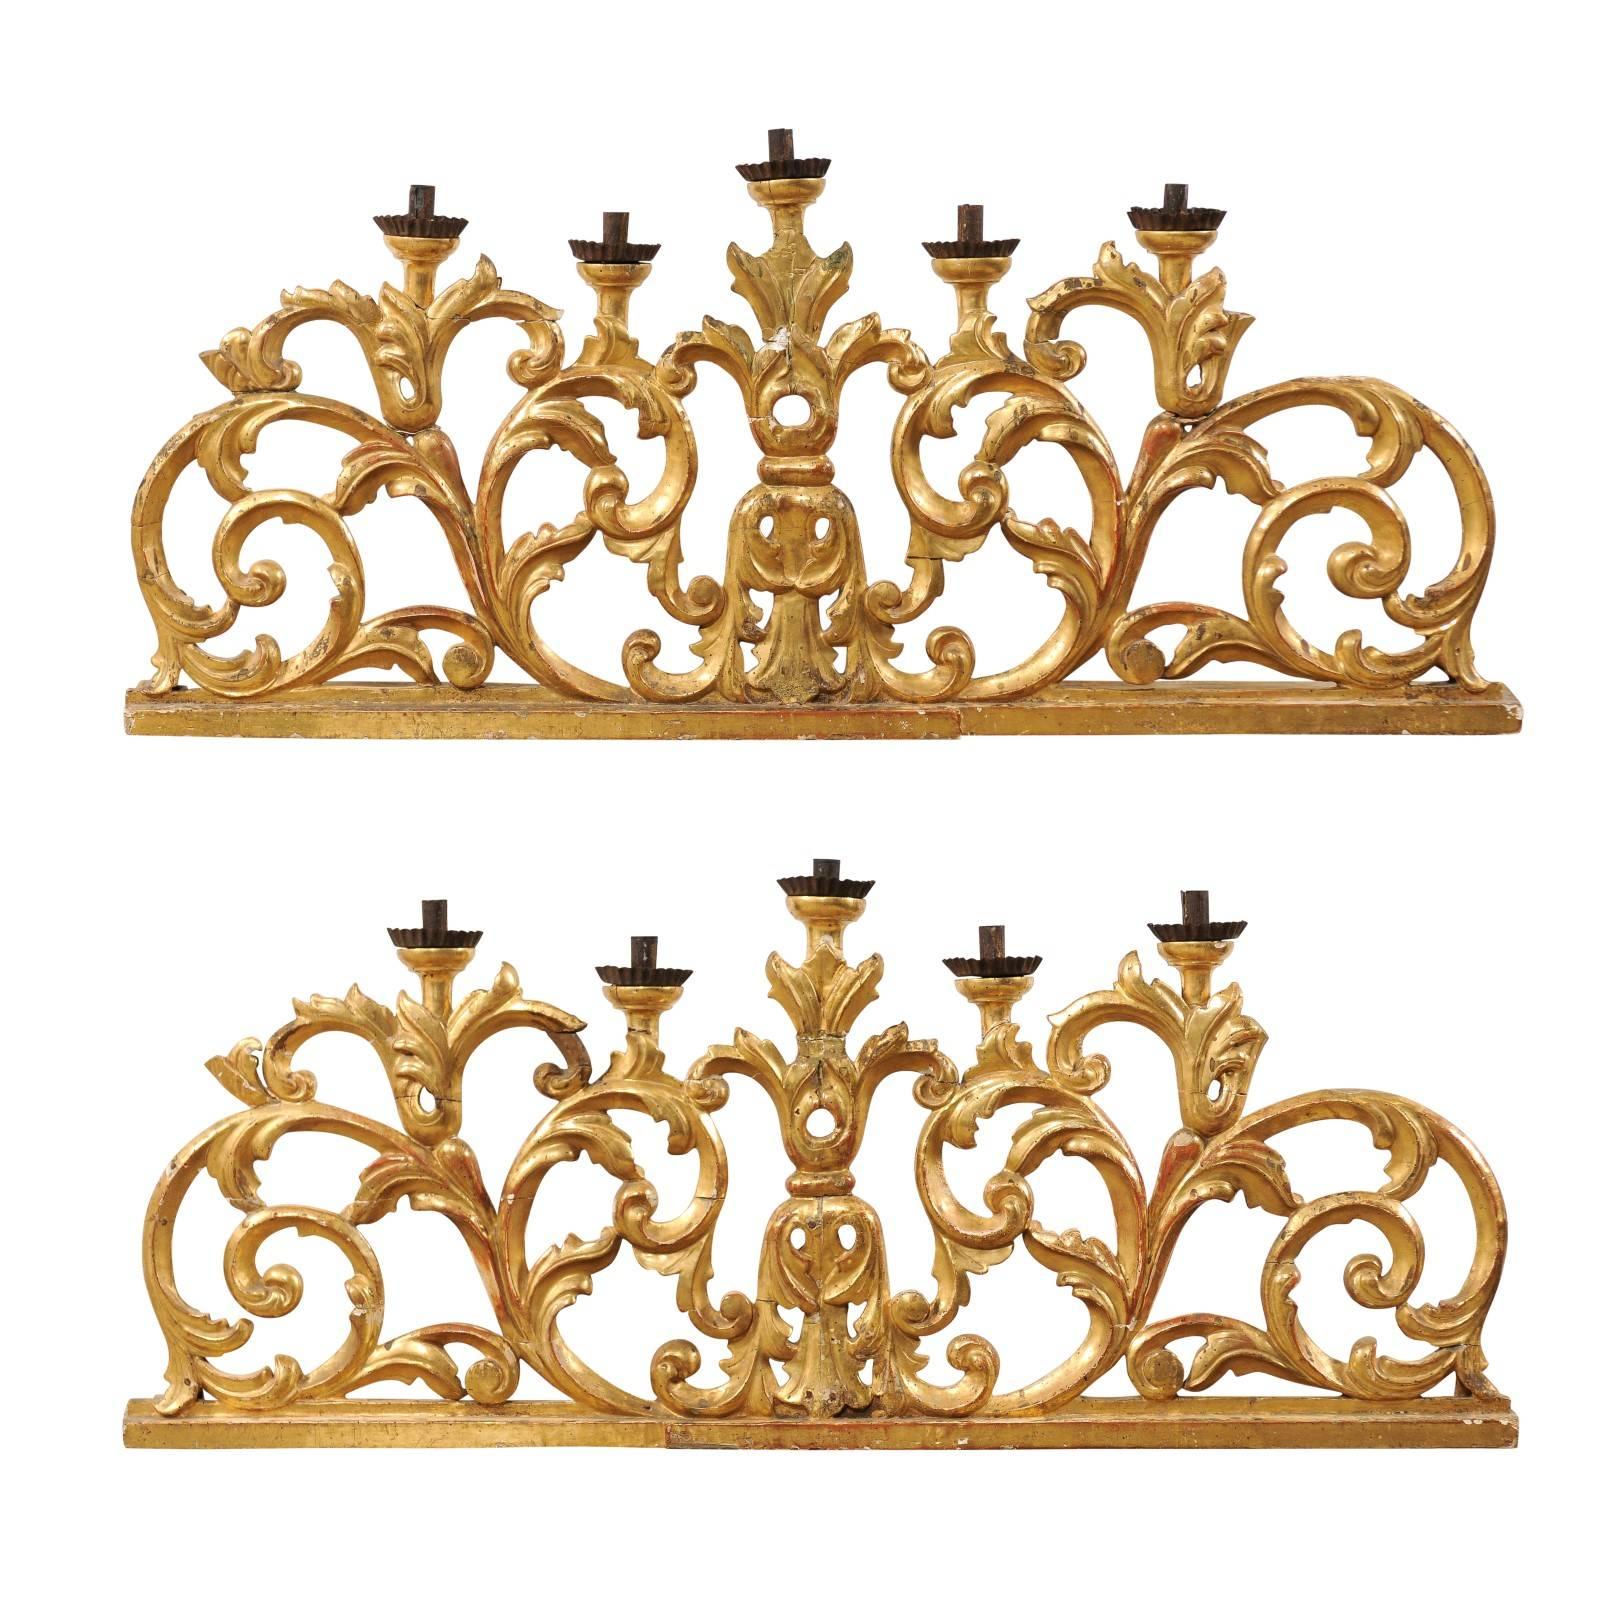 Exquisite Italian Pair of Large Carved Gilt-wood Five Candle Candelabra, 19th C.